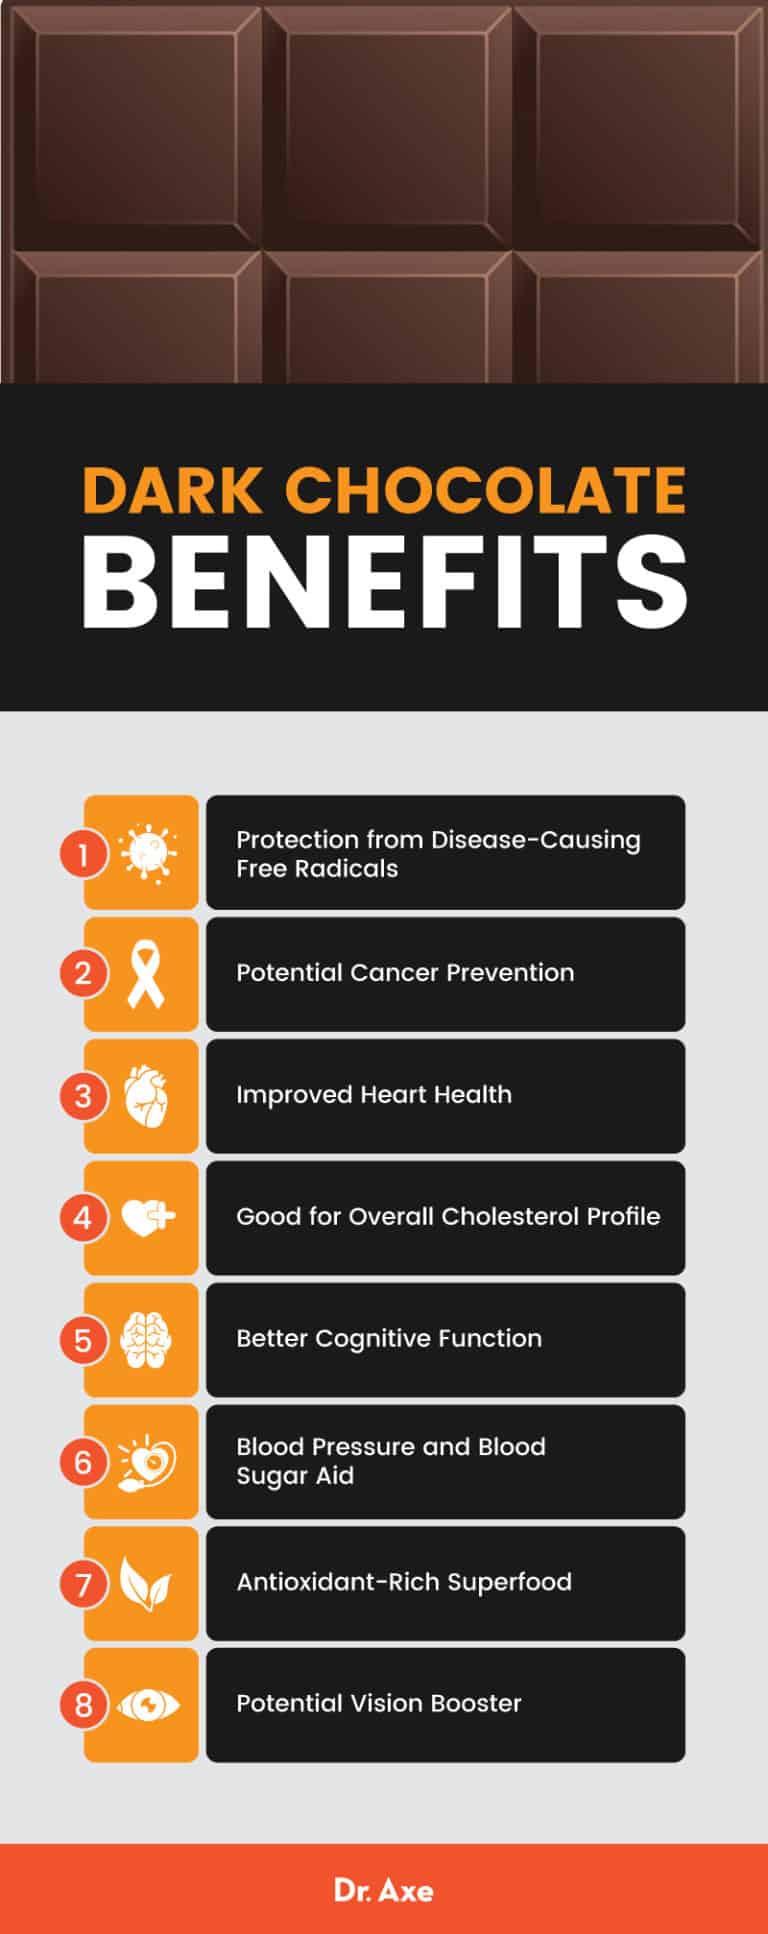 Benefits Of Dark Chocolate Recipes Nutrition Risks Dr Axe